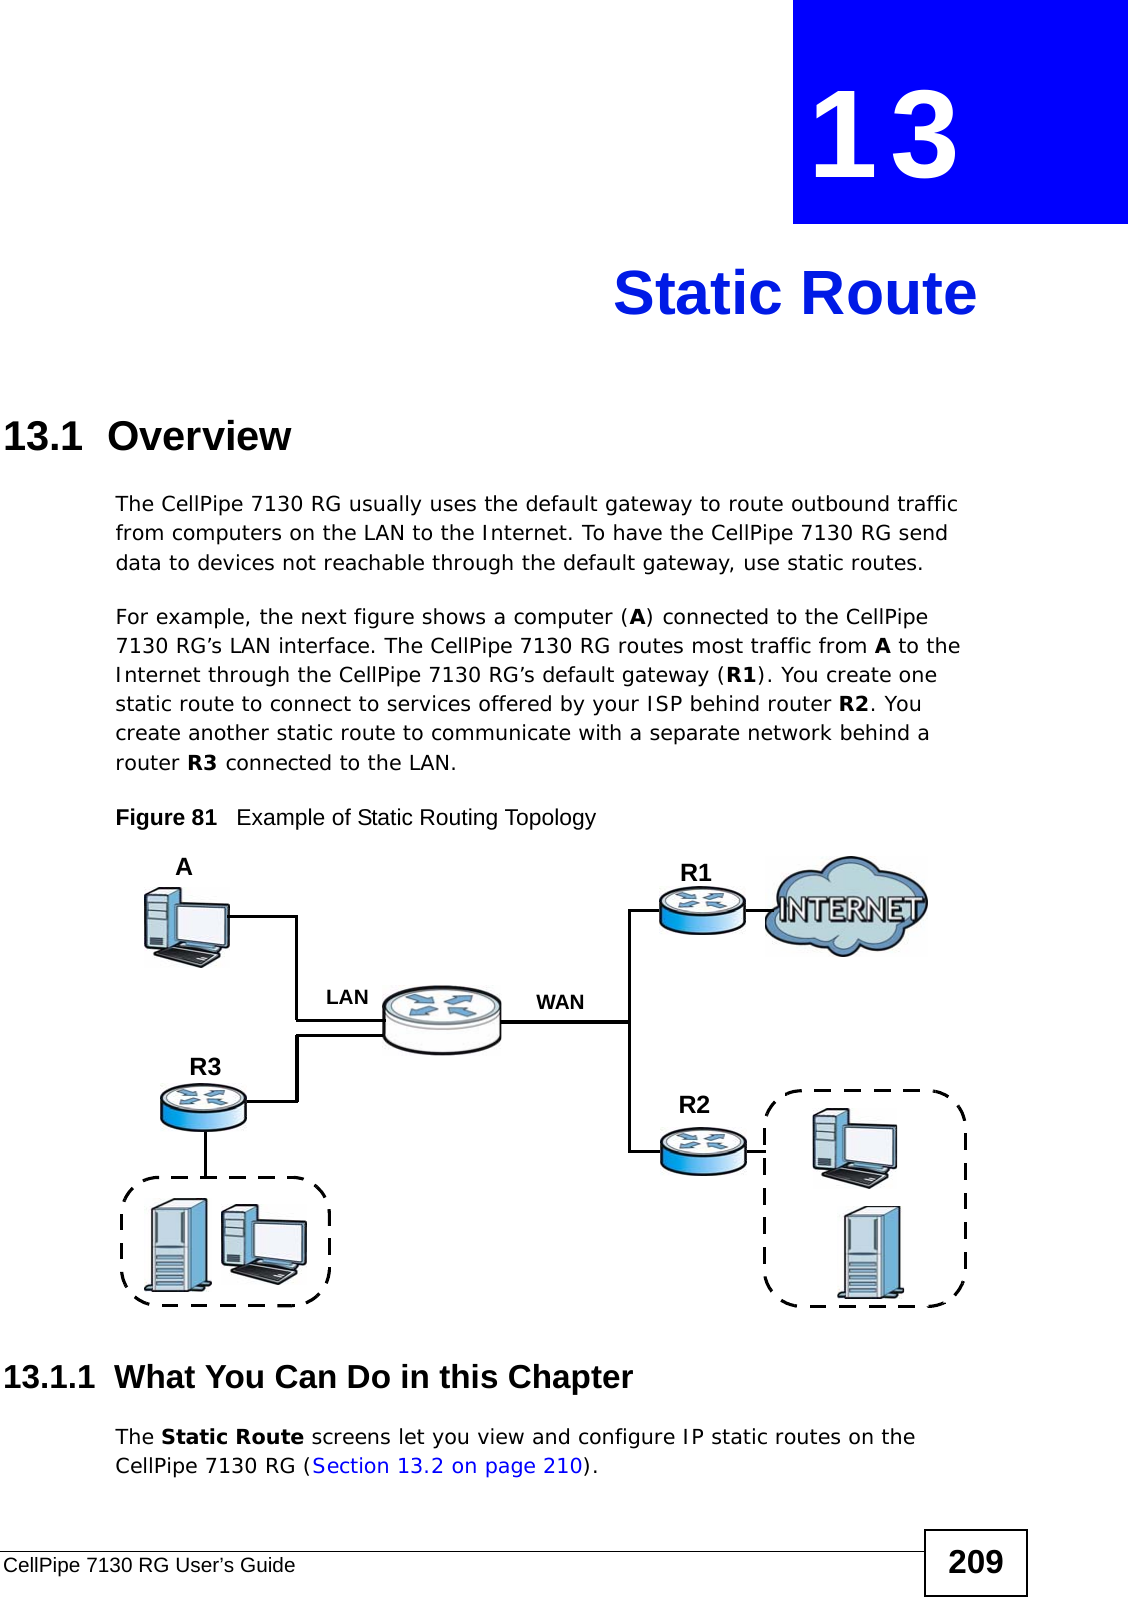 CellPipe 7130 RG User’s Guide 209CHAPTER  13 Static Route13.1  Overview   The CellPipe 7130 RG usually uses the default gateway to route outbound traffic from computers on the LAN to the Internet. To have the CellPipe 7130 RG send data to devices not reachable through the default gateway, use static routes.For example, the next figure shows a computer (A) connected to the CellPipe 7130 RG’s LAN interface. The CellPipe 7130 RG routes most traffic from A to the Internet through the CellPipe 7130 RG’s default gateway (R1). You create one static route to connect to services offered by your ISP behind router R2. You create another static route to communicate with a separate network behind a router R3 connected to the LAN.Figure 81   Example of Static Routing Topology13.1.1  What You Can Do in this ChapterThe Static Route screens let you view and configure IP static routes on the CellPipe 7130 RG (Section 13.2 on page 210).WANR1R2AR3LAN